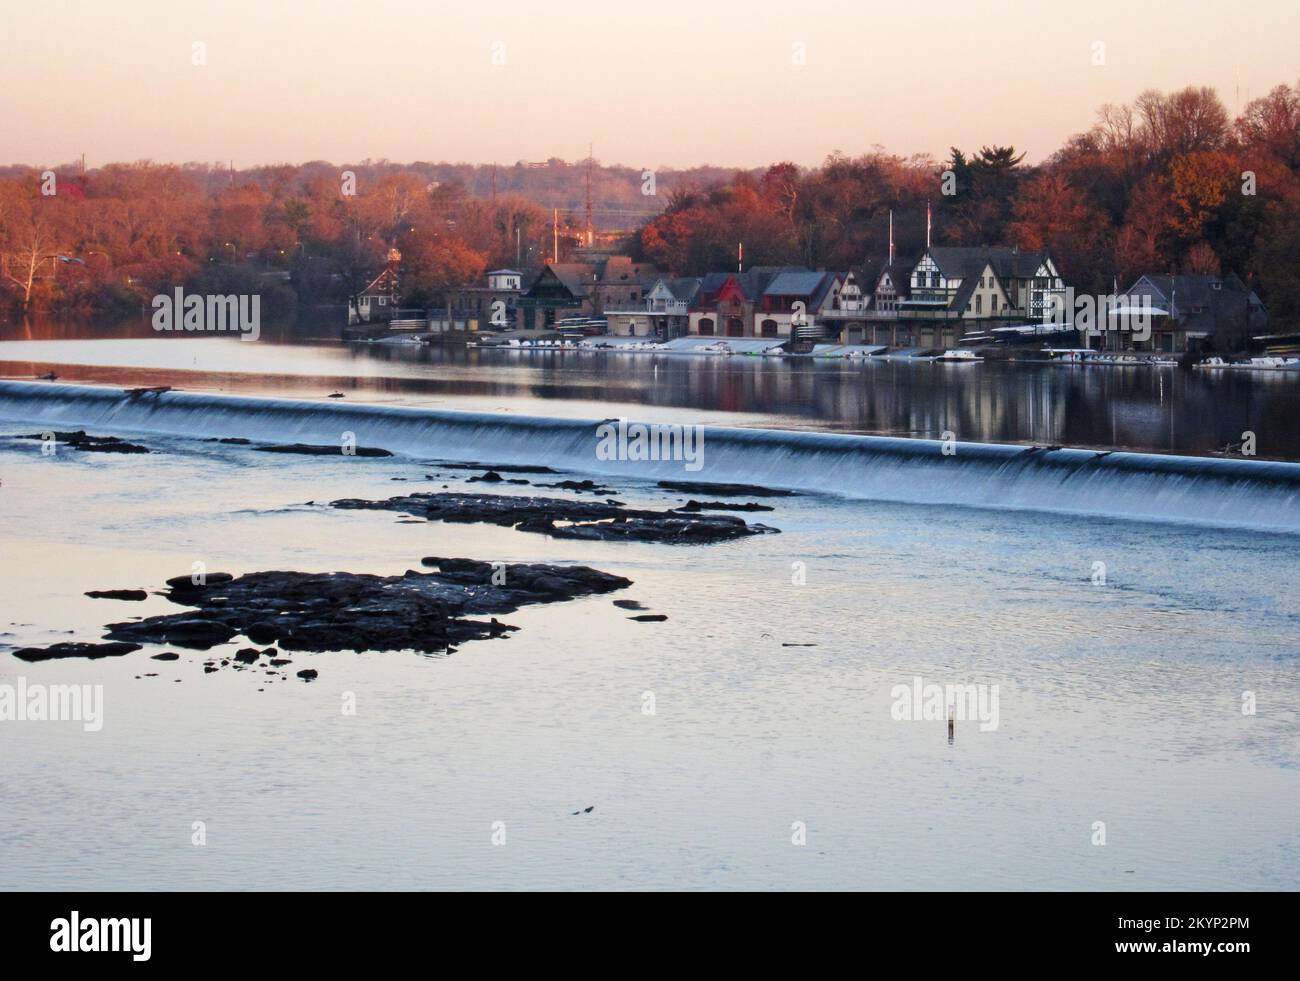 Philadelphia's Boathouse Row on the Schuylkill River in late fall. Stock Photo